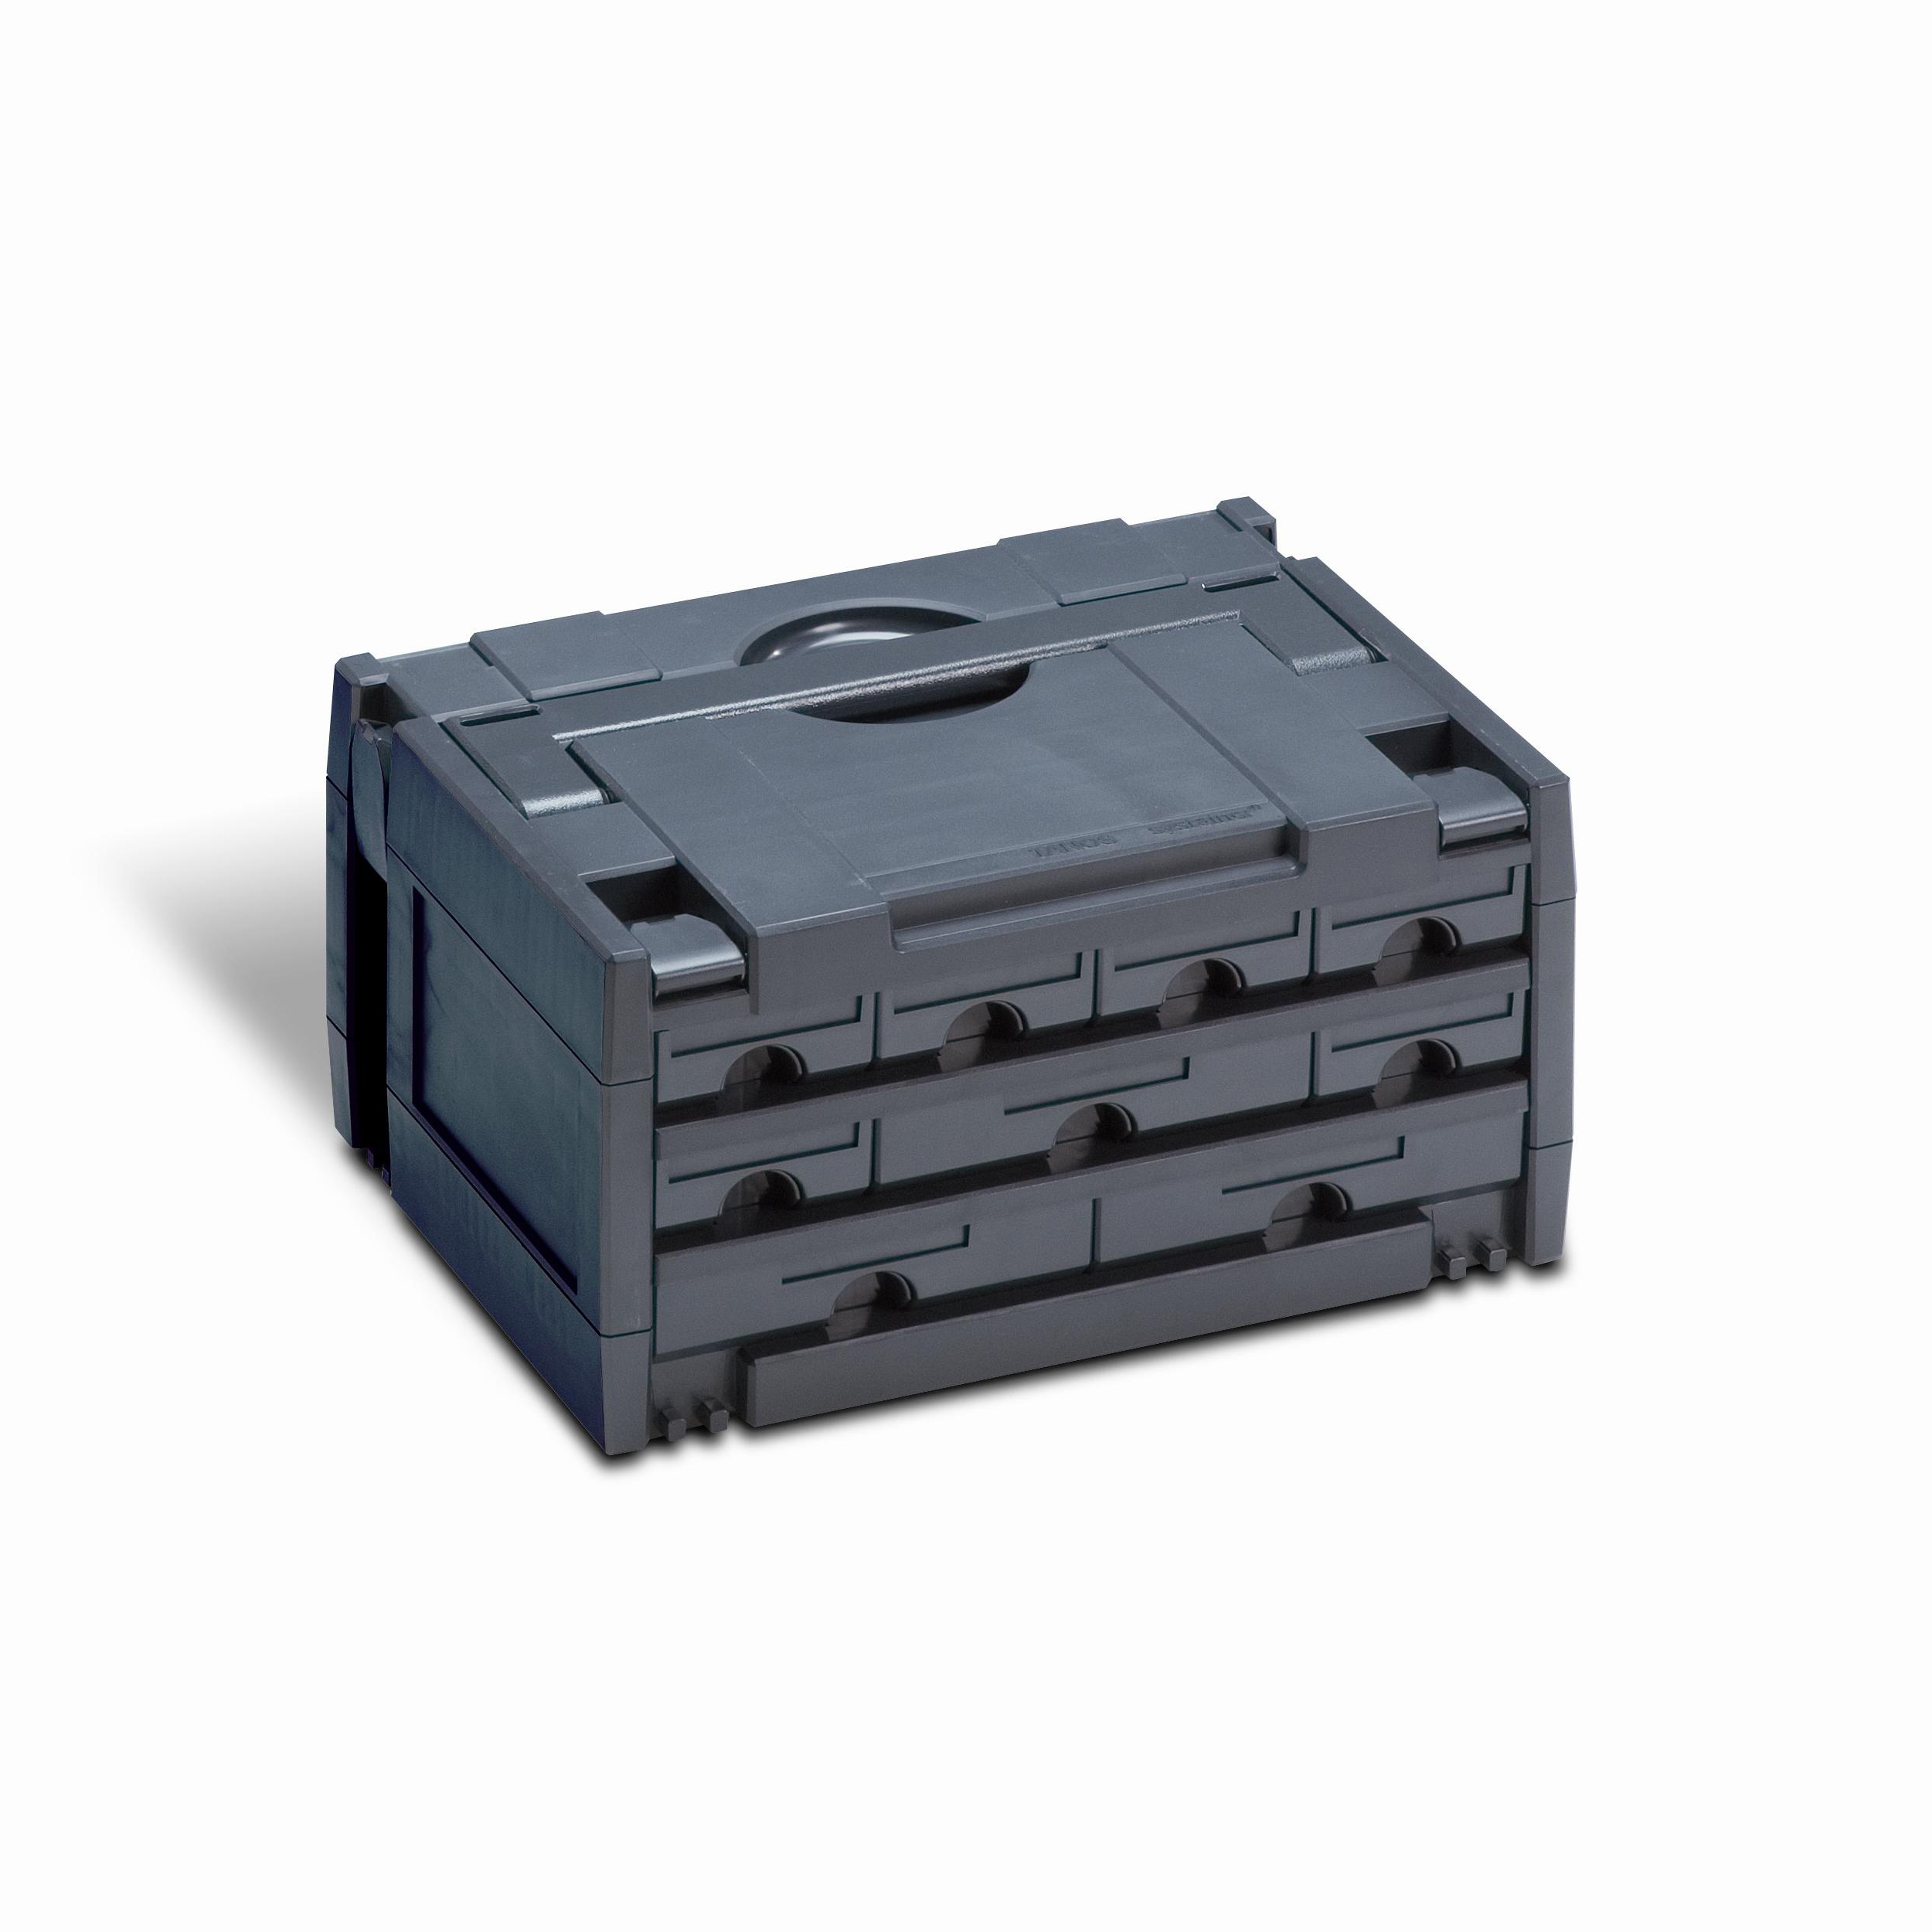 Drawer-systainer Iii - Variant 2 Anthracite